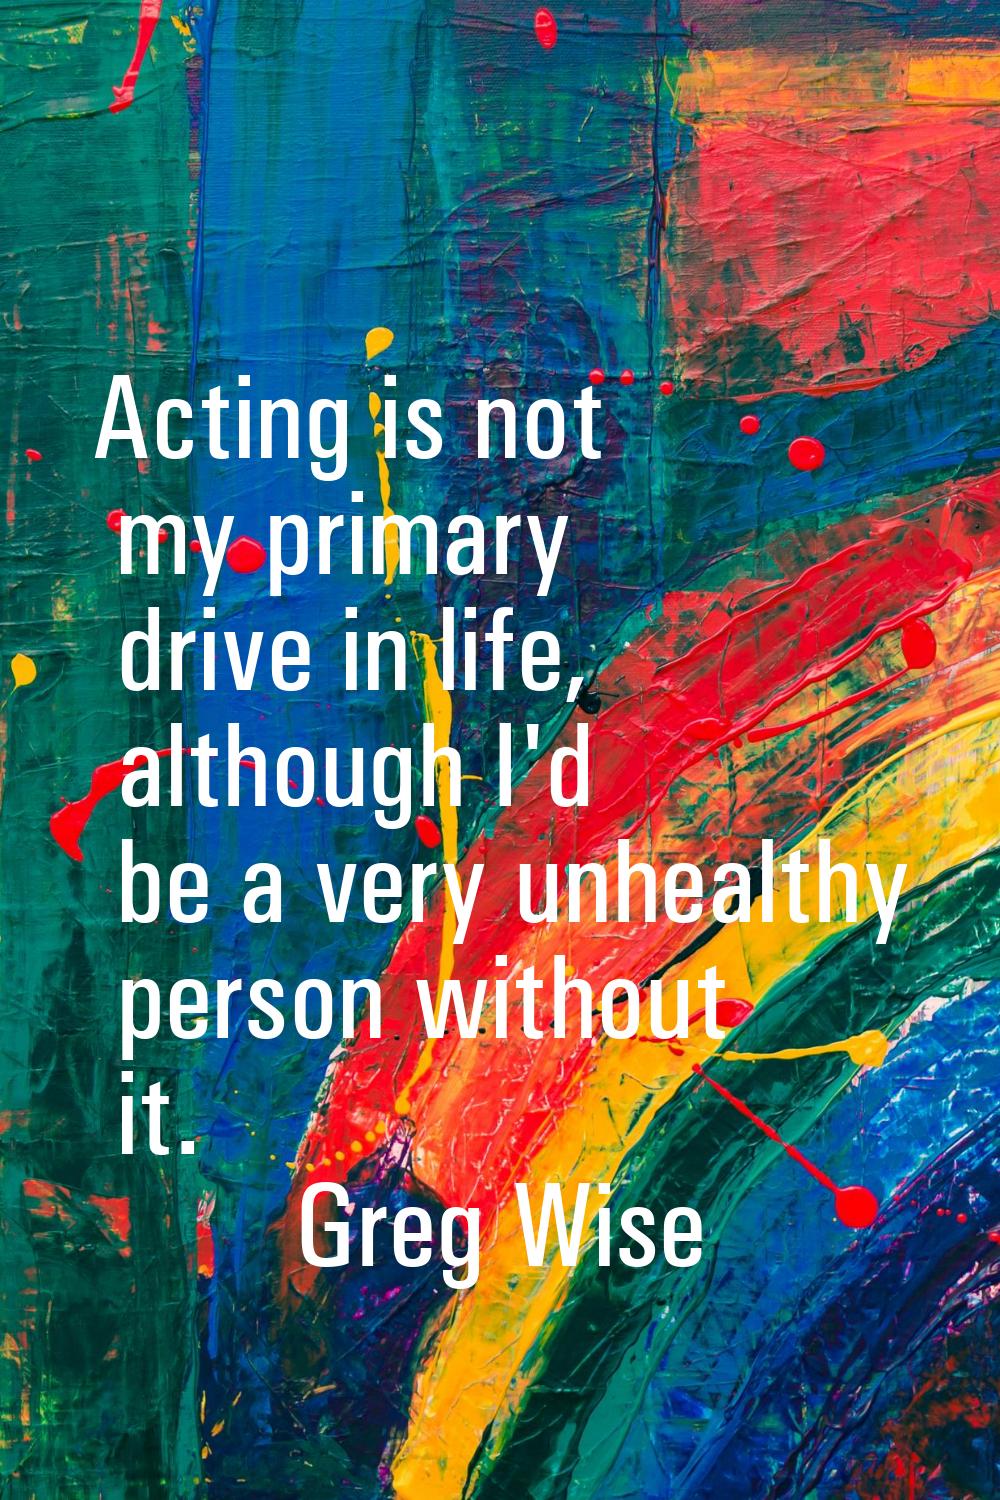 Acting is not my primary drive in life, although I'd be a very unhealthy person without it.